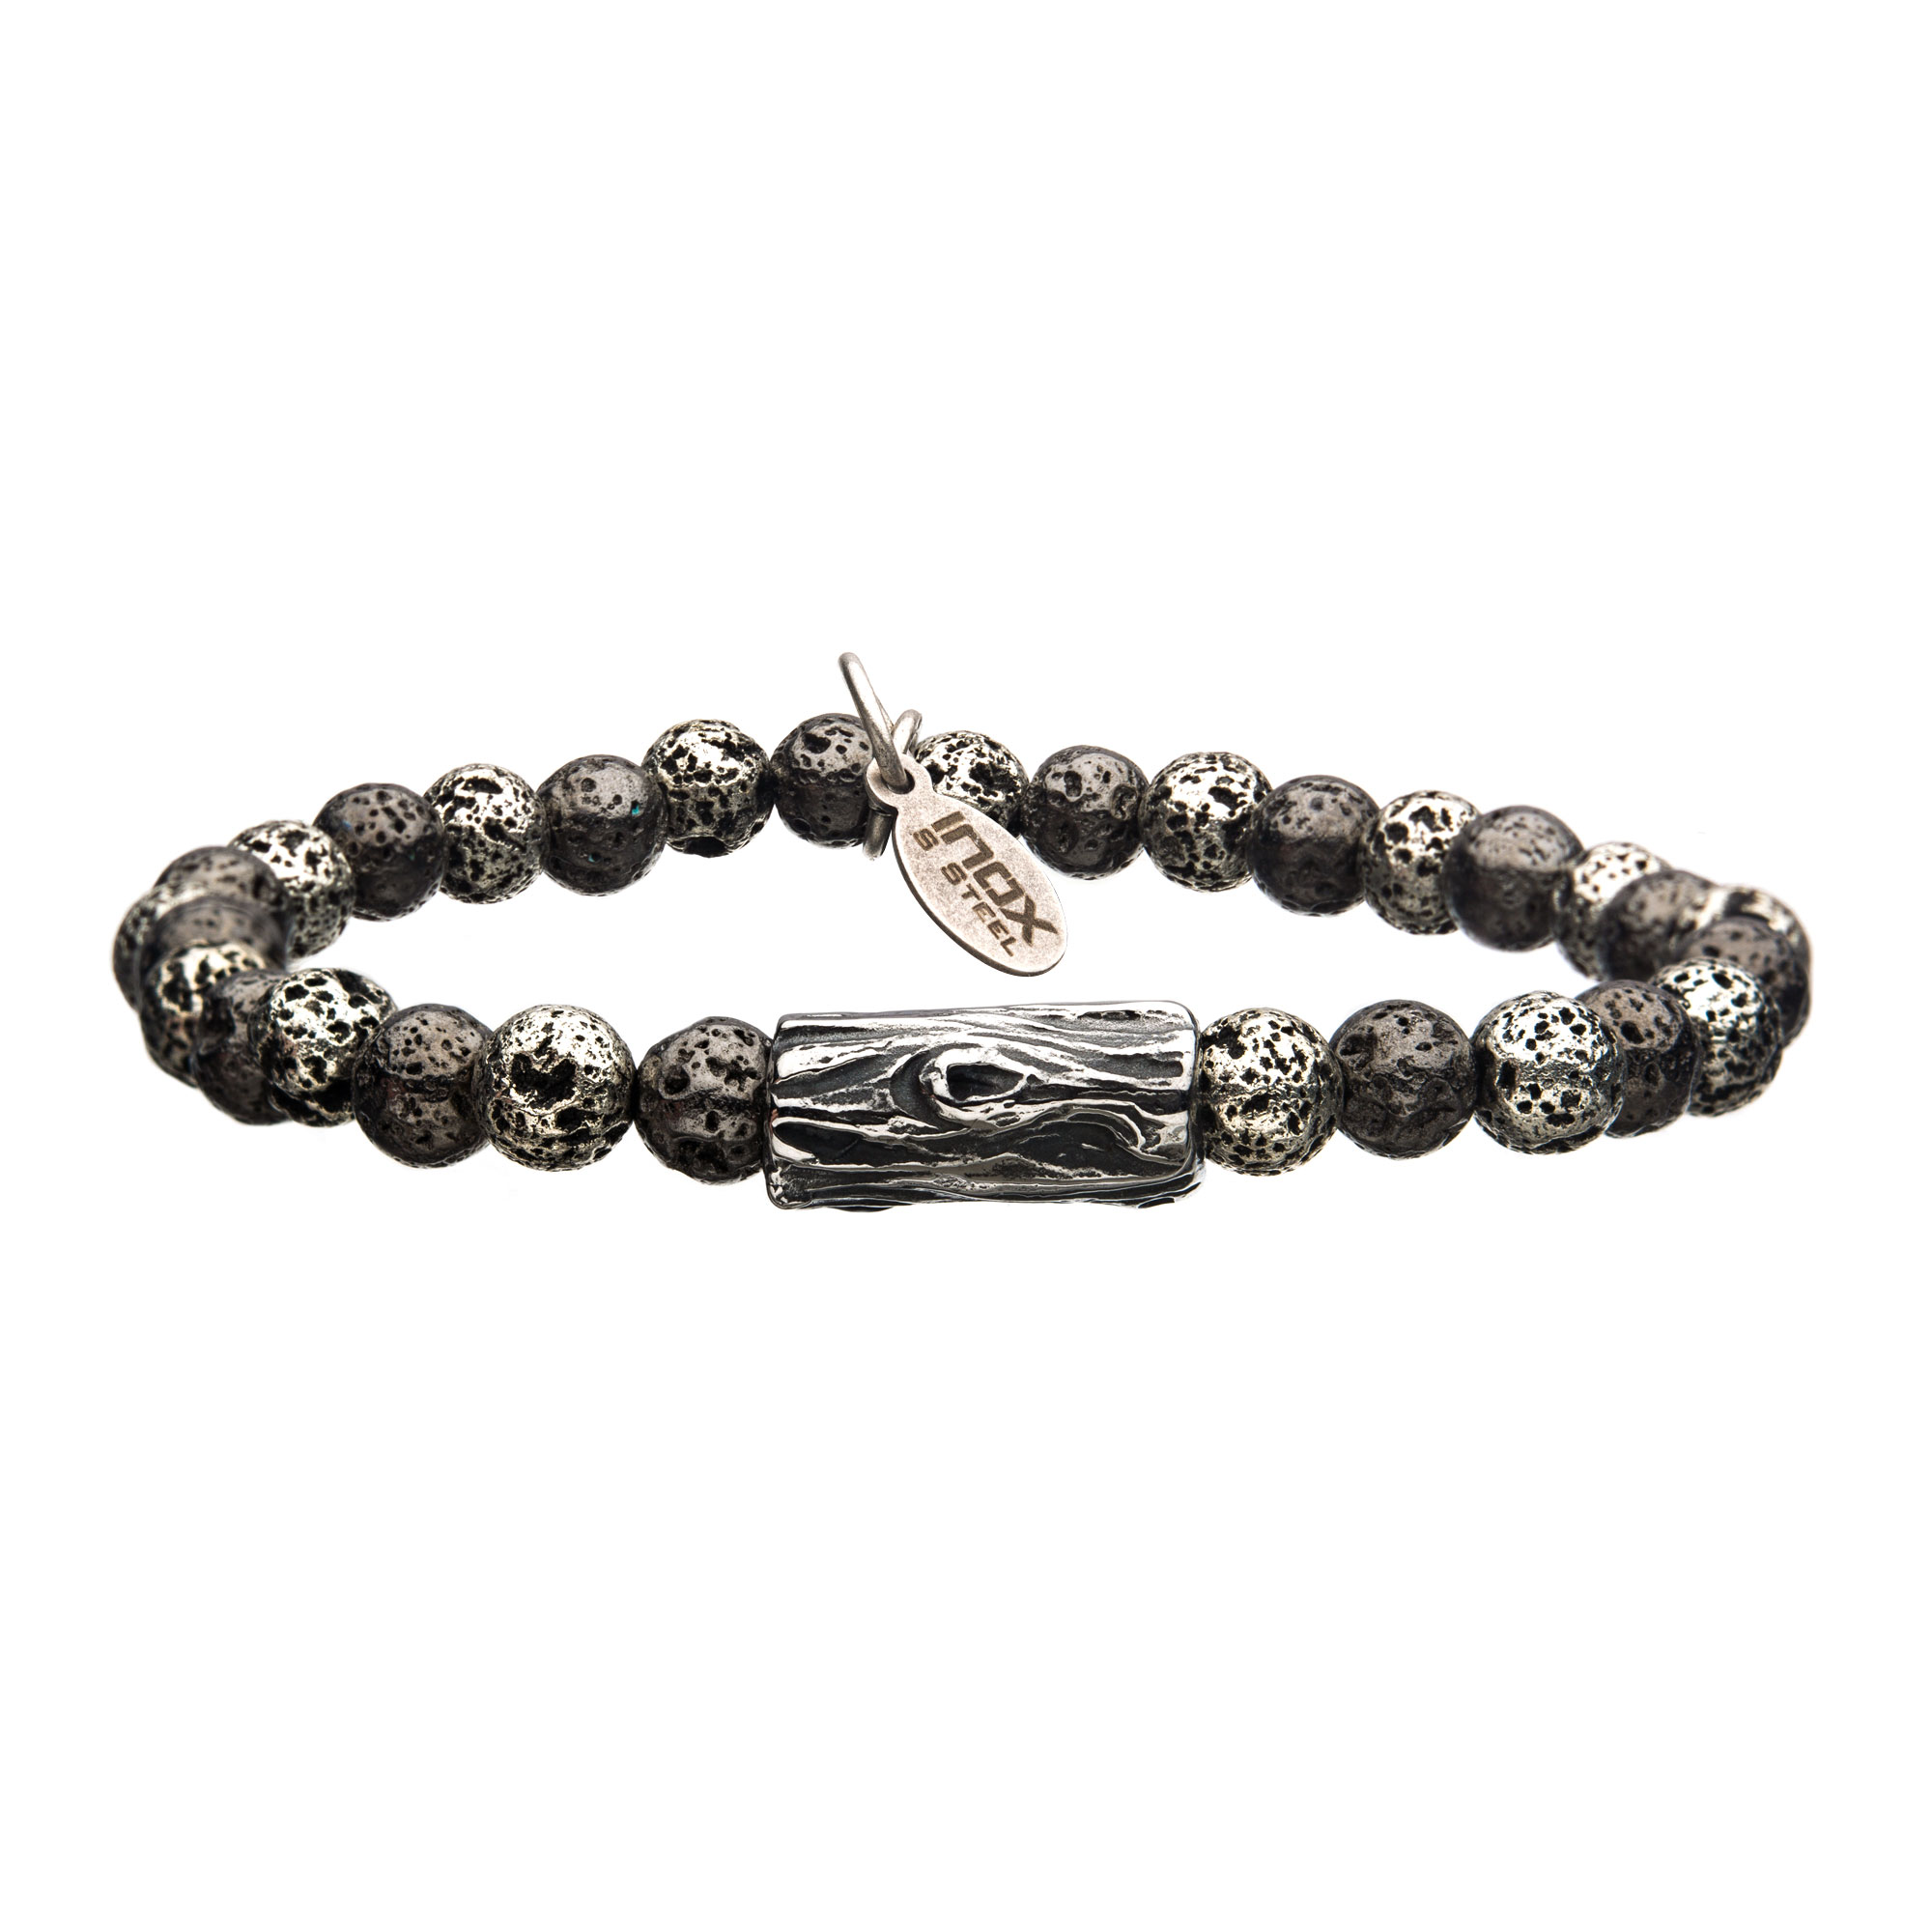 6mm Matte Beads with Hematite Beads String Bracelet Lewis Jewelers, Inc. Ansonia, CT